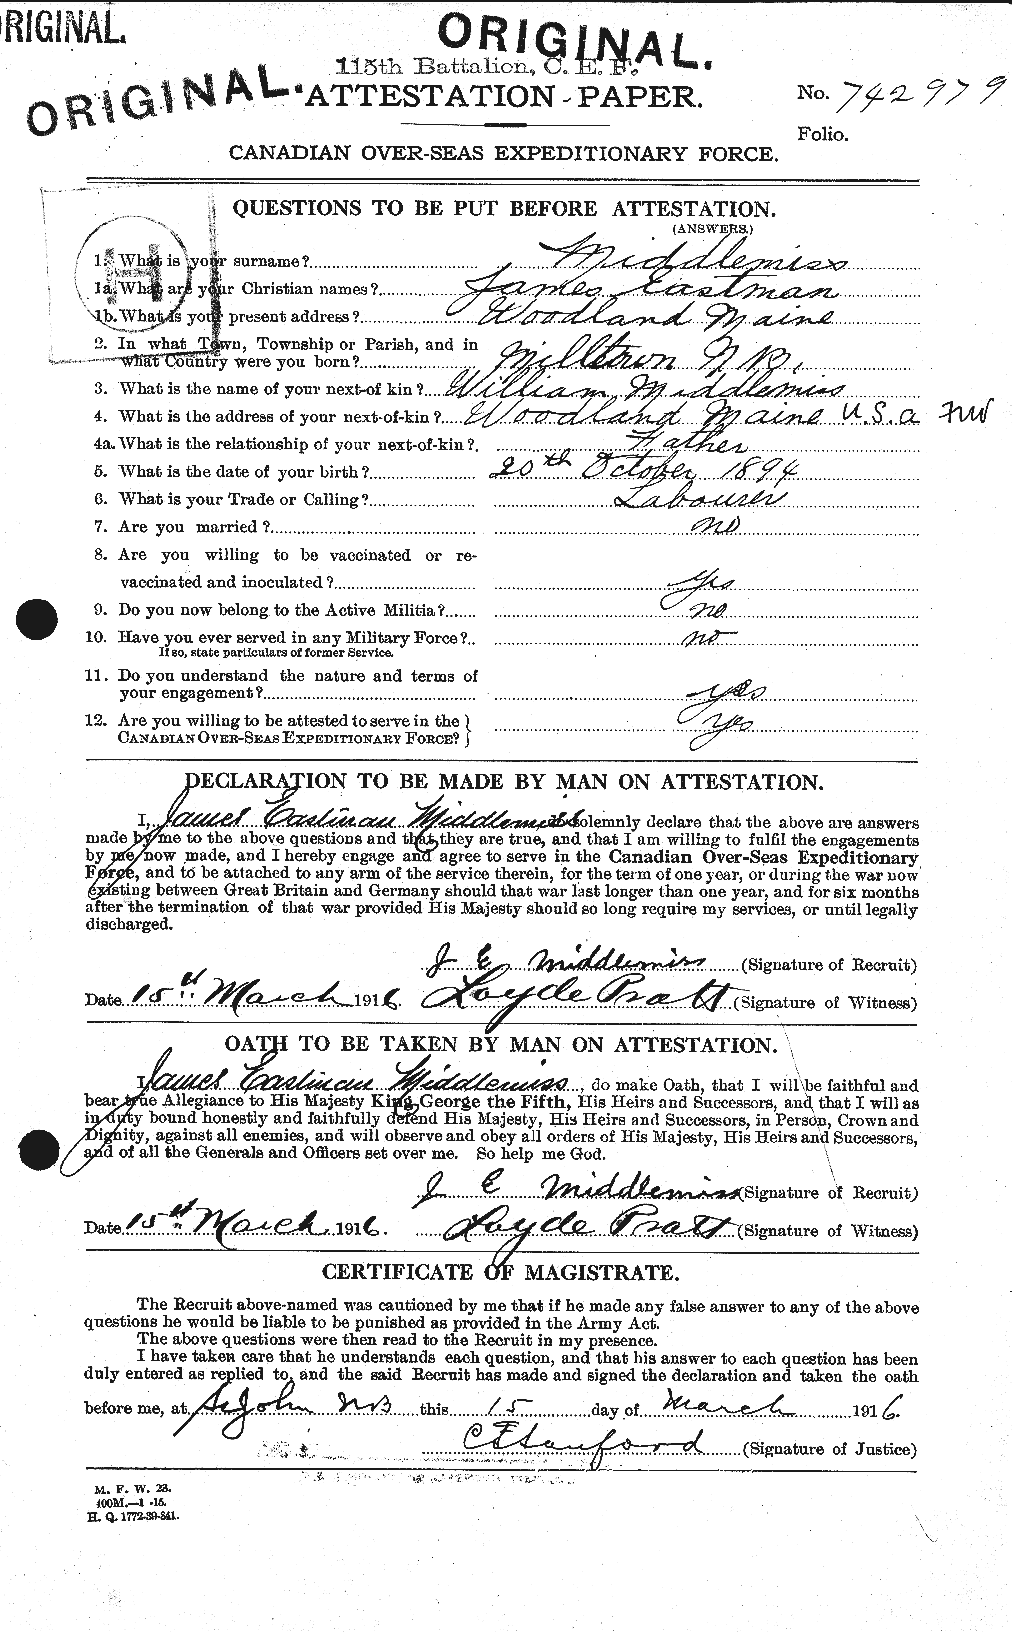 Personnel Records of the First World War - CEF 493007a